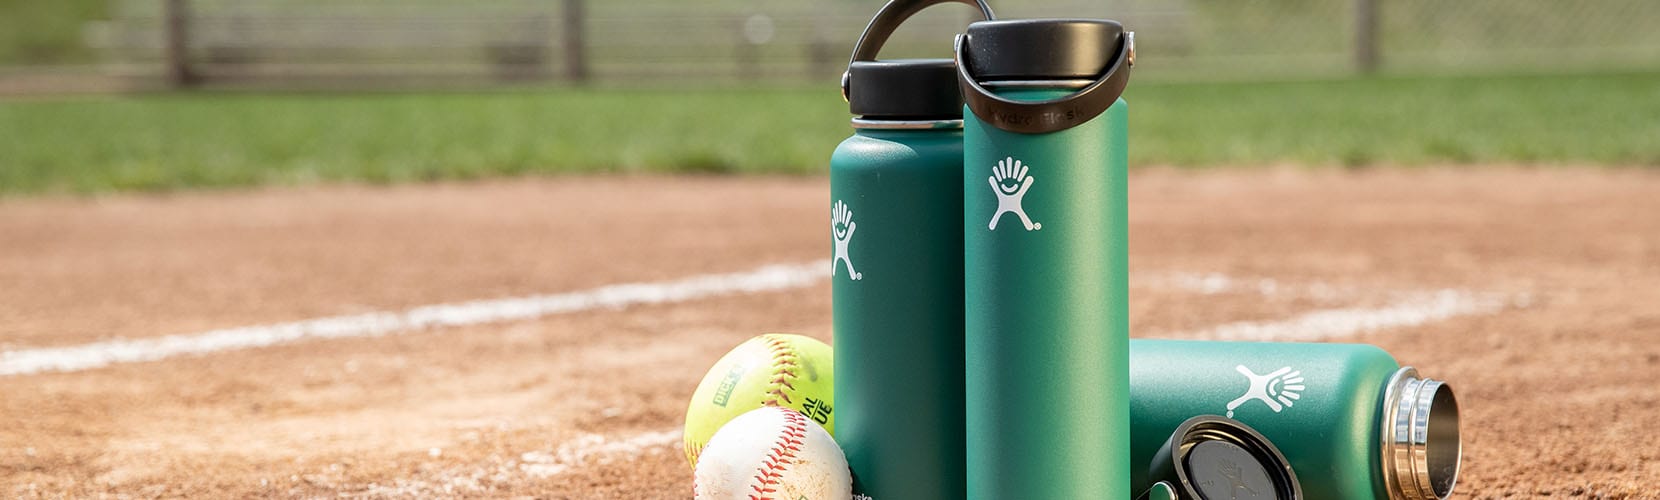 An image of water bottles and baseballs on a field.